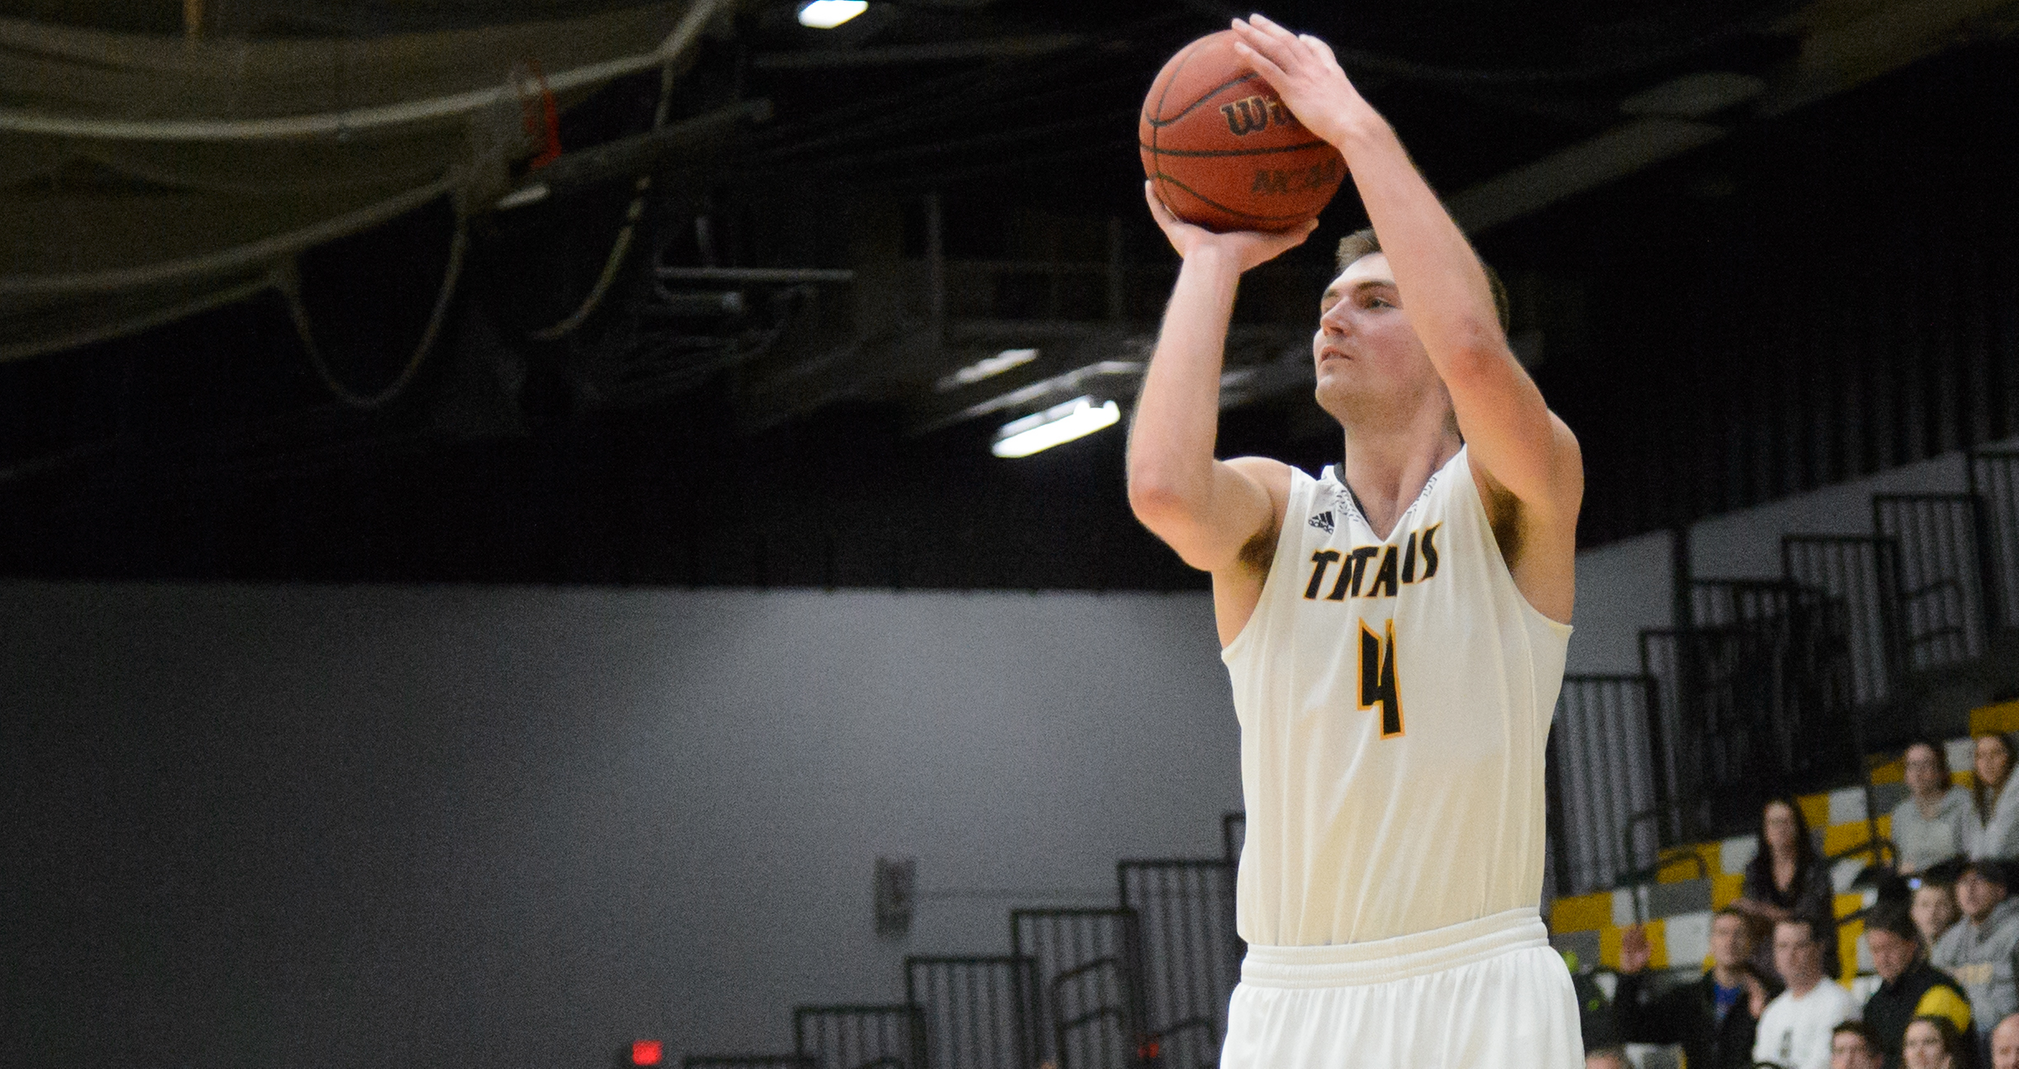 Brett WIttchow had 15 points and a team-high five rebounds against the Eagles.